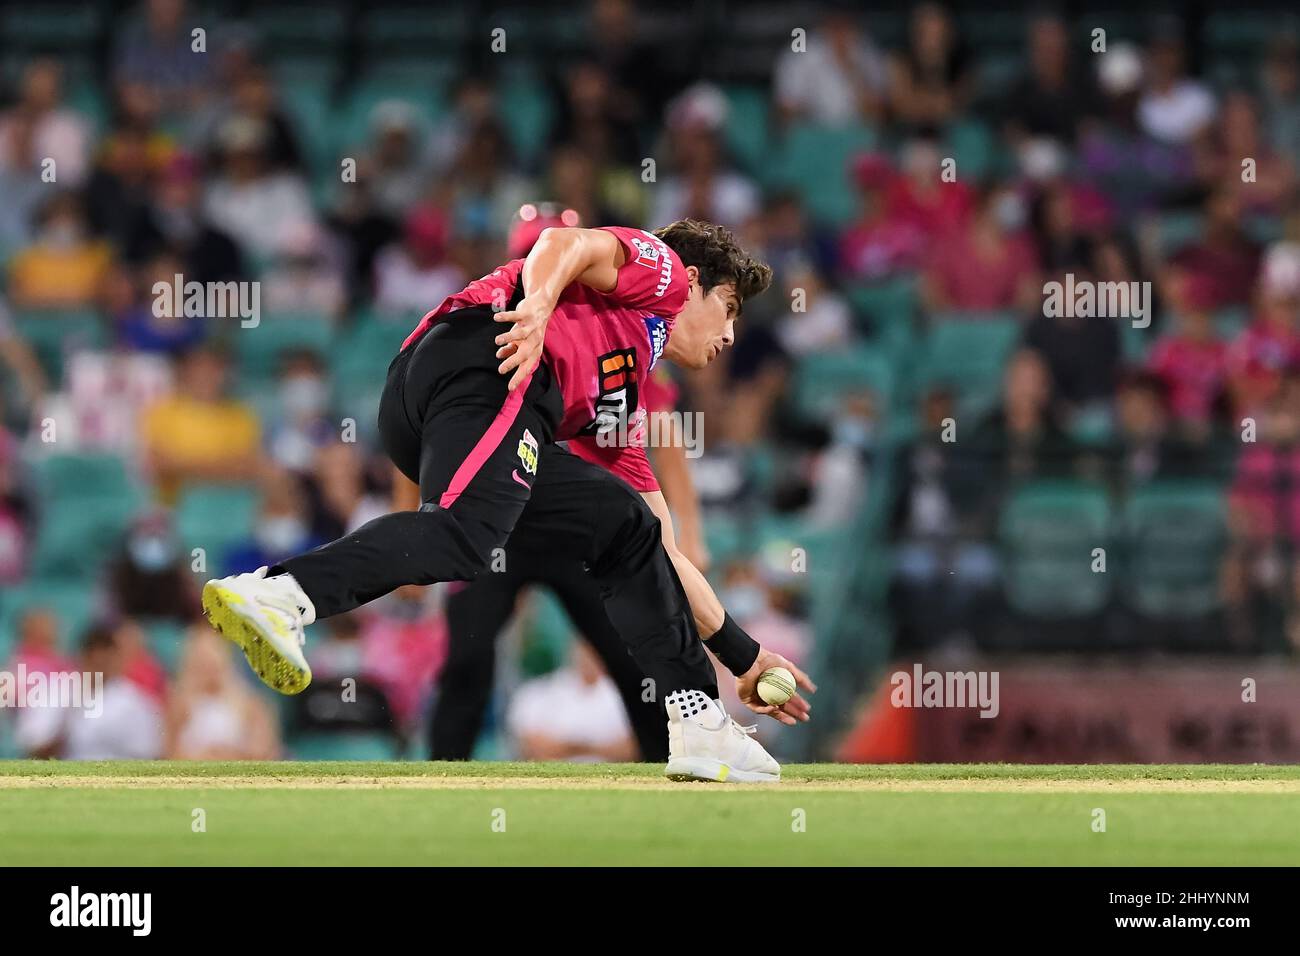 Sydney, Australia, 26 January, 2022. Sean Abbott of the Sixers fields the ball during the Big Bash League Challenger cricket match between Sydney Sixers and Adelaide Strikers at The Sydney Cricket Ground on January 26, 2022 in Sydney, Australia. Credit: Steven Markham/Speed Media/Alamy Live News Stock Photo